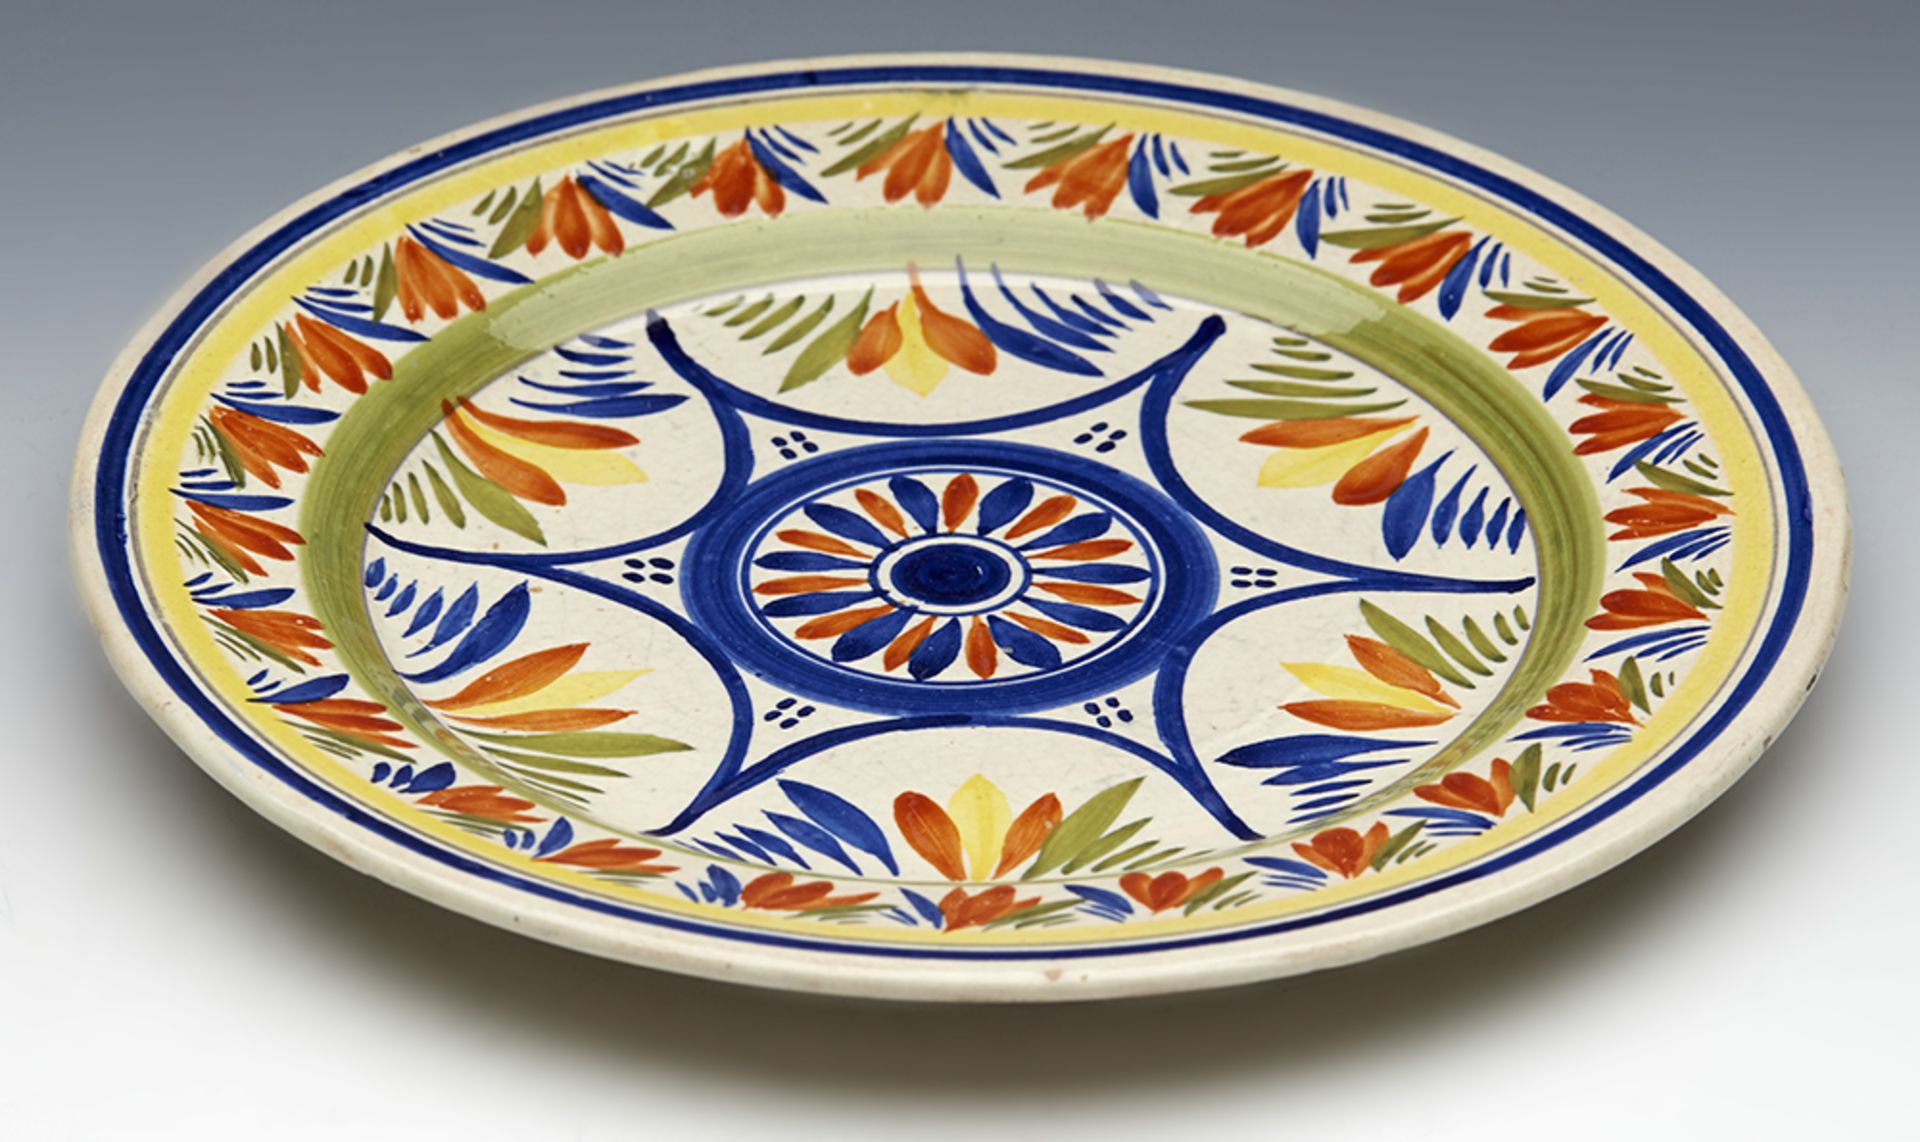 HENRIOT QUIMPER FAIENCE GEOMETRIC PATTERNED PLATE C.1925 - Image 7 of 7